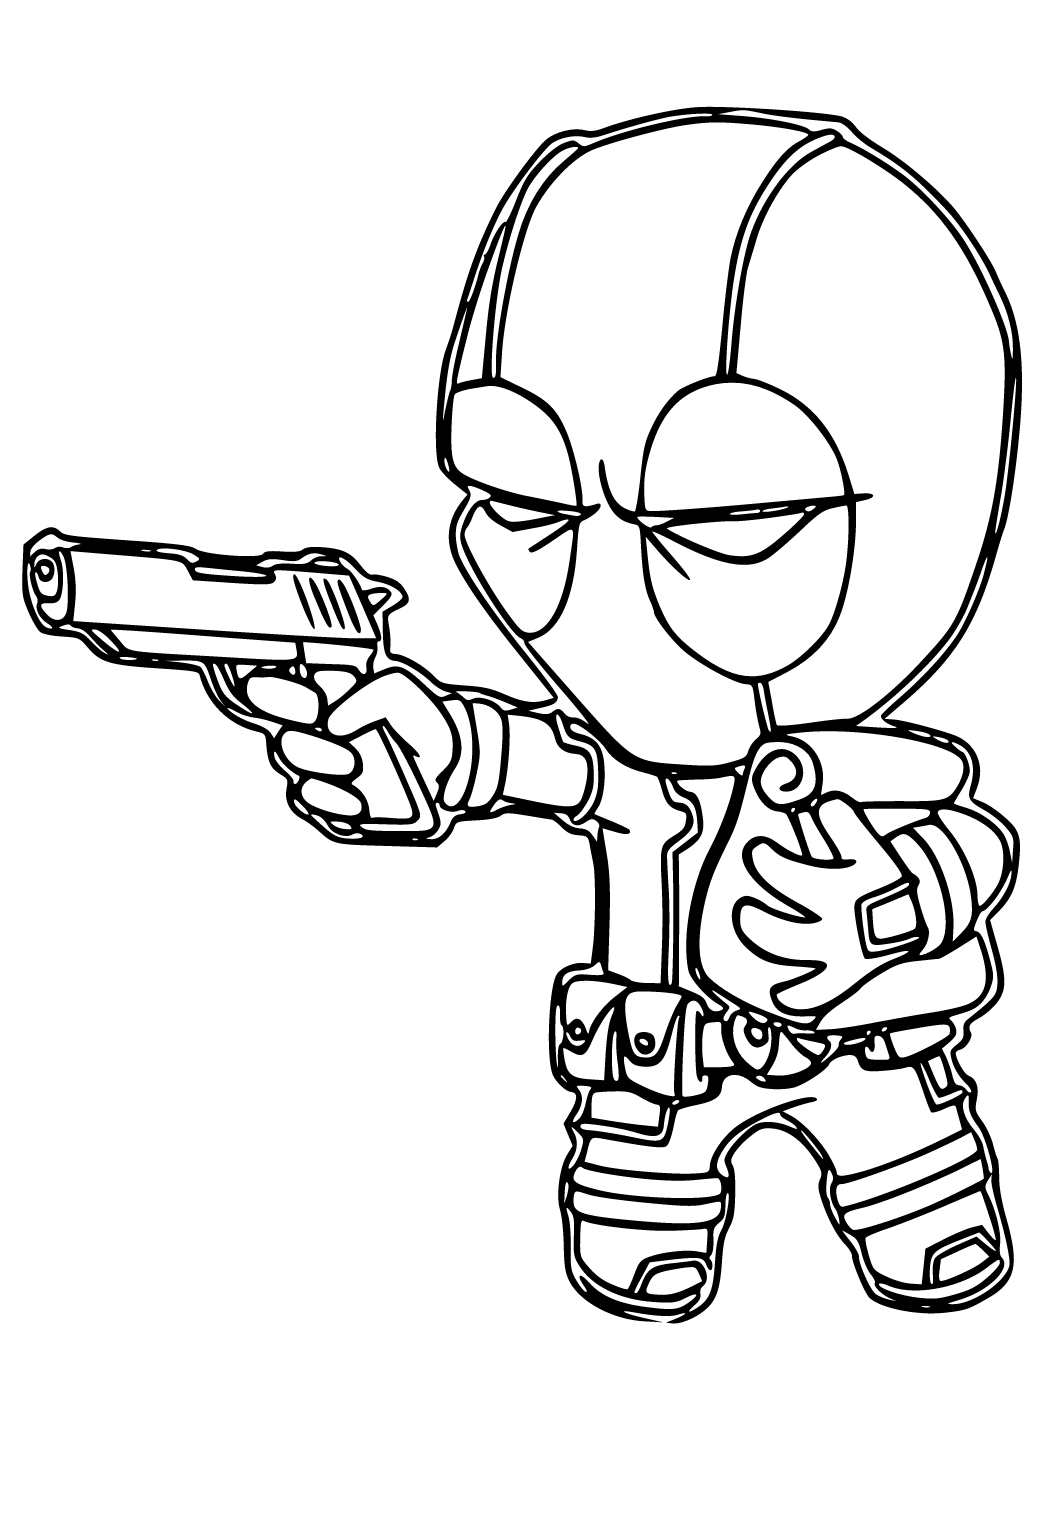 Free printable deadpool gun coloring page for adults and kids